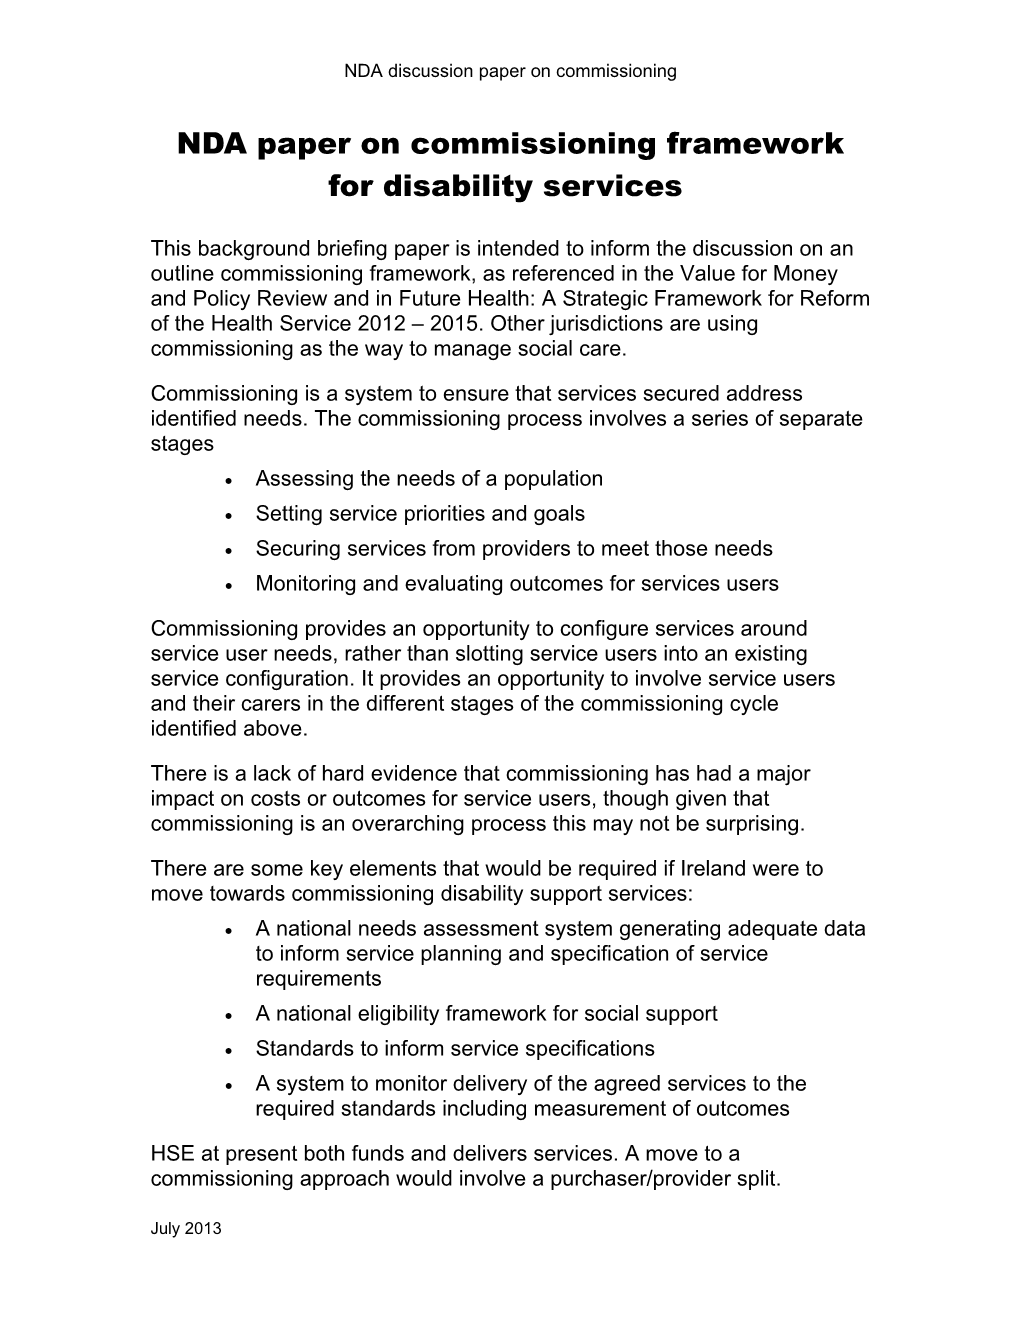 NDA Paper on Commissioning Framework for Disability Services